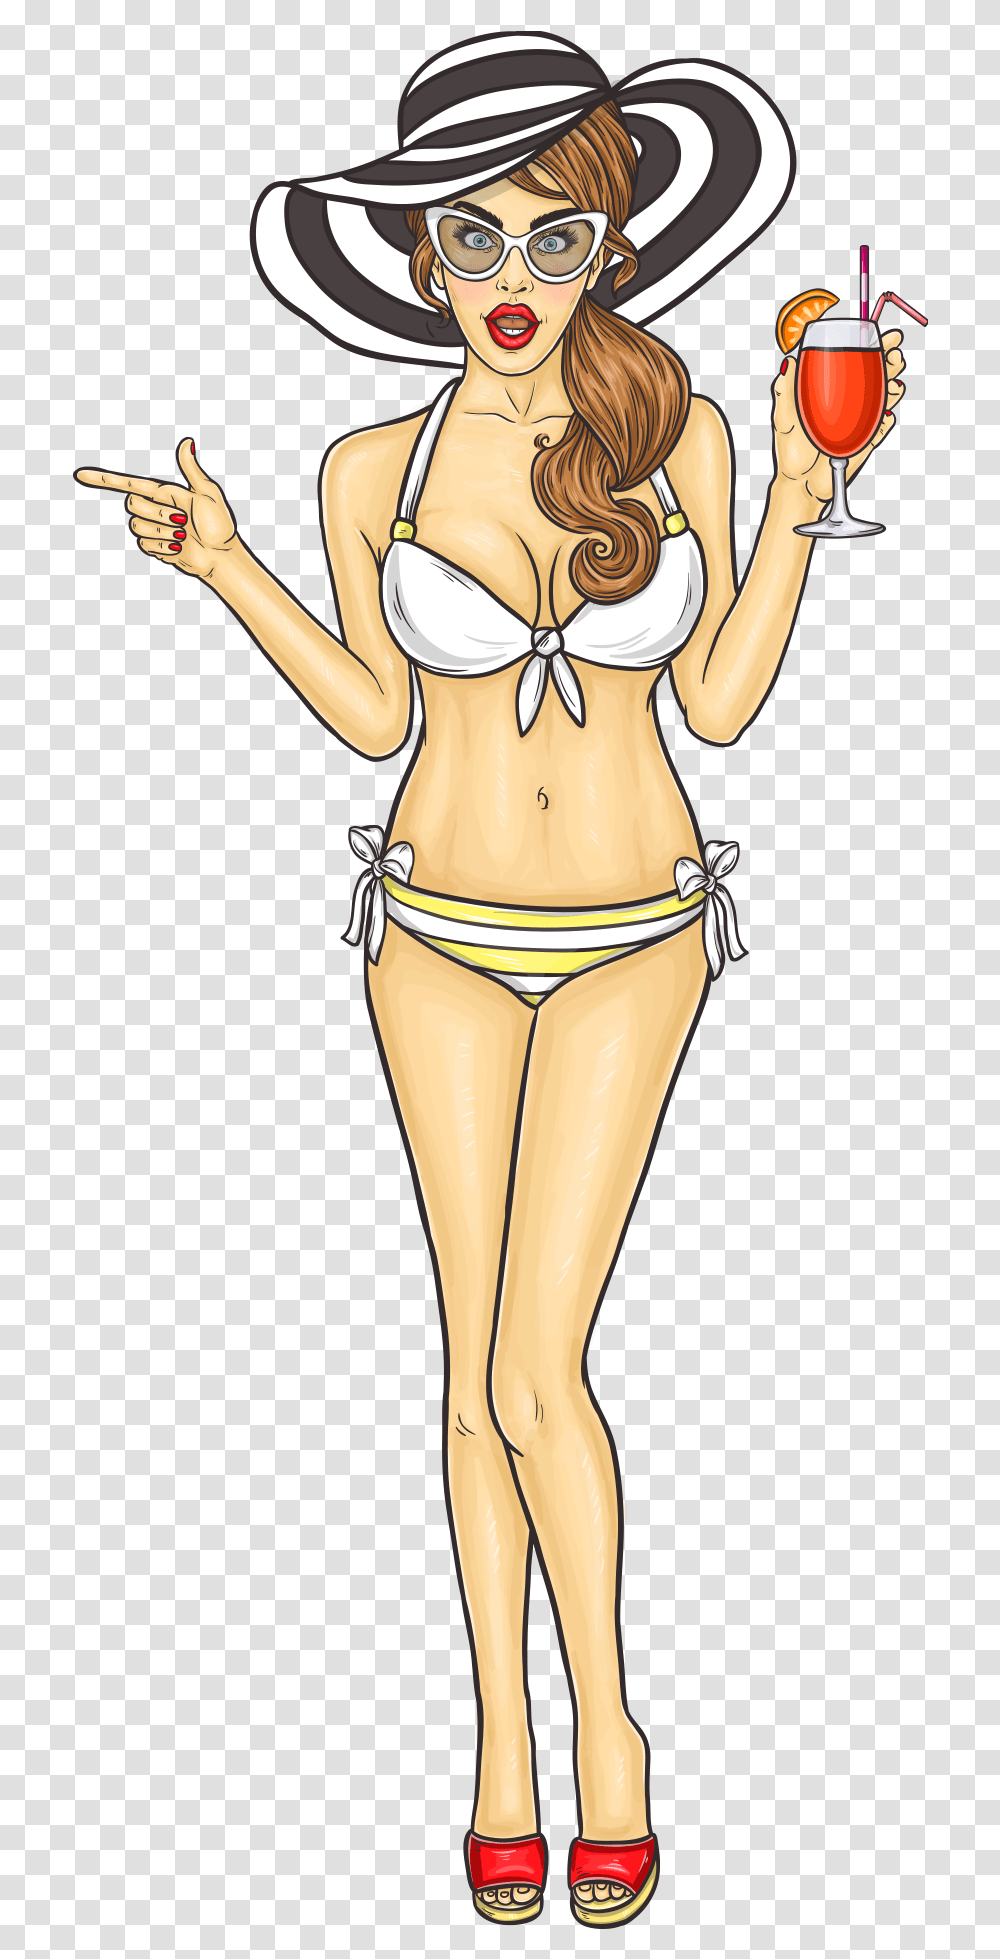 Beach Girl Holding A Cocktail Image Free Download Cartoon Sexy Girl, Sunglasses, Person, Swimwear Transparent Png